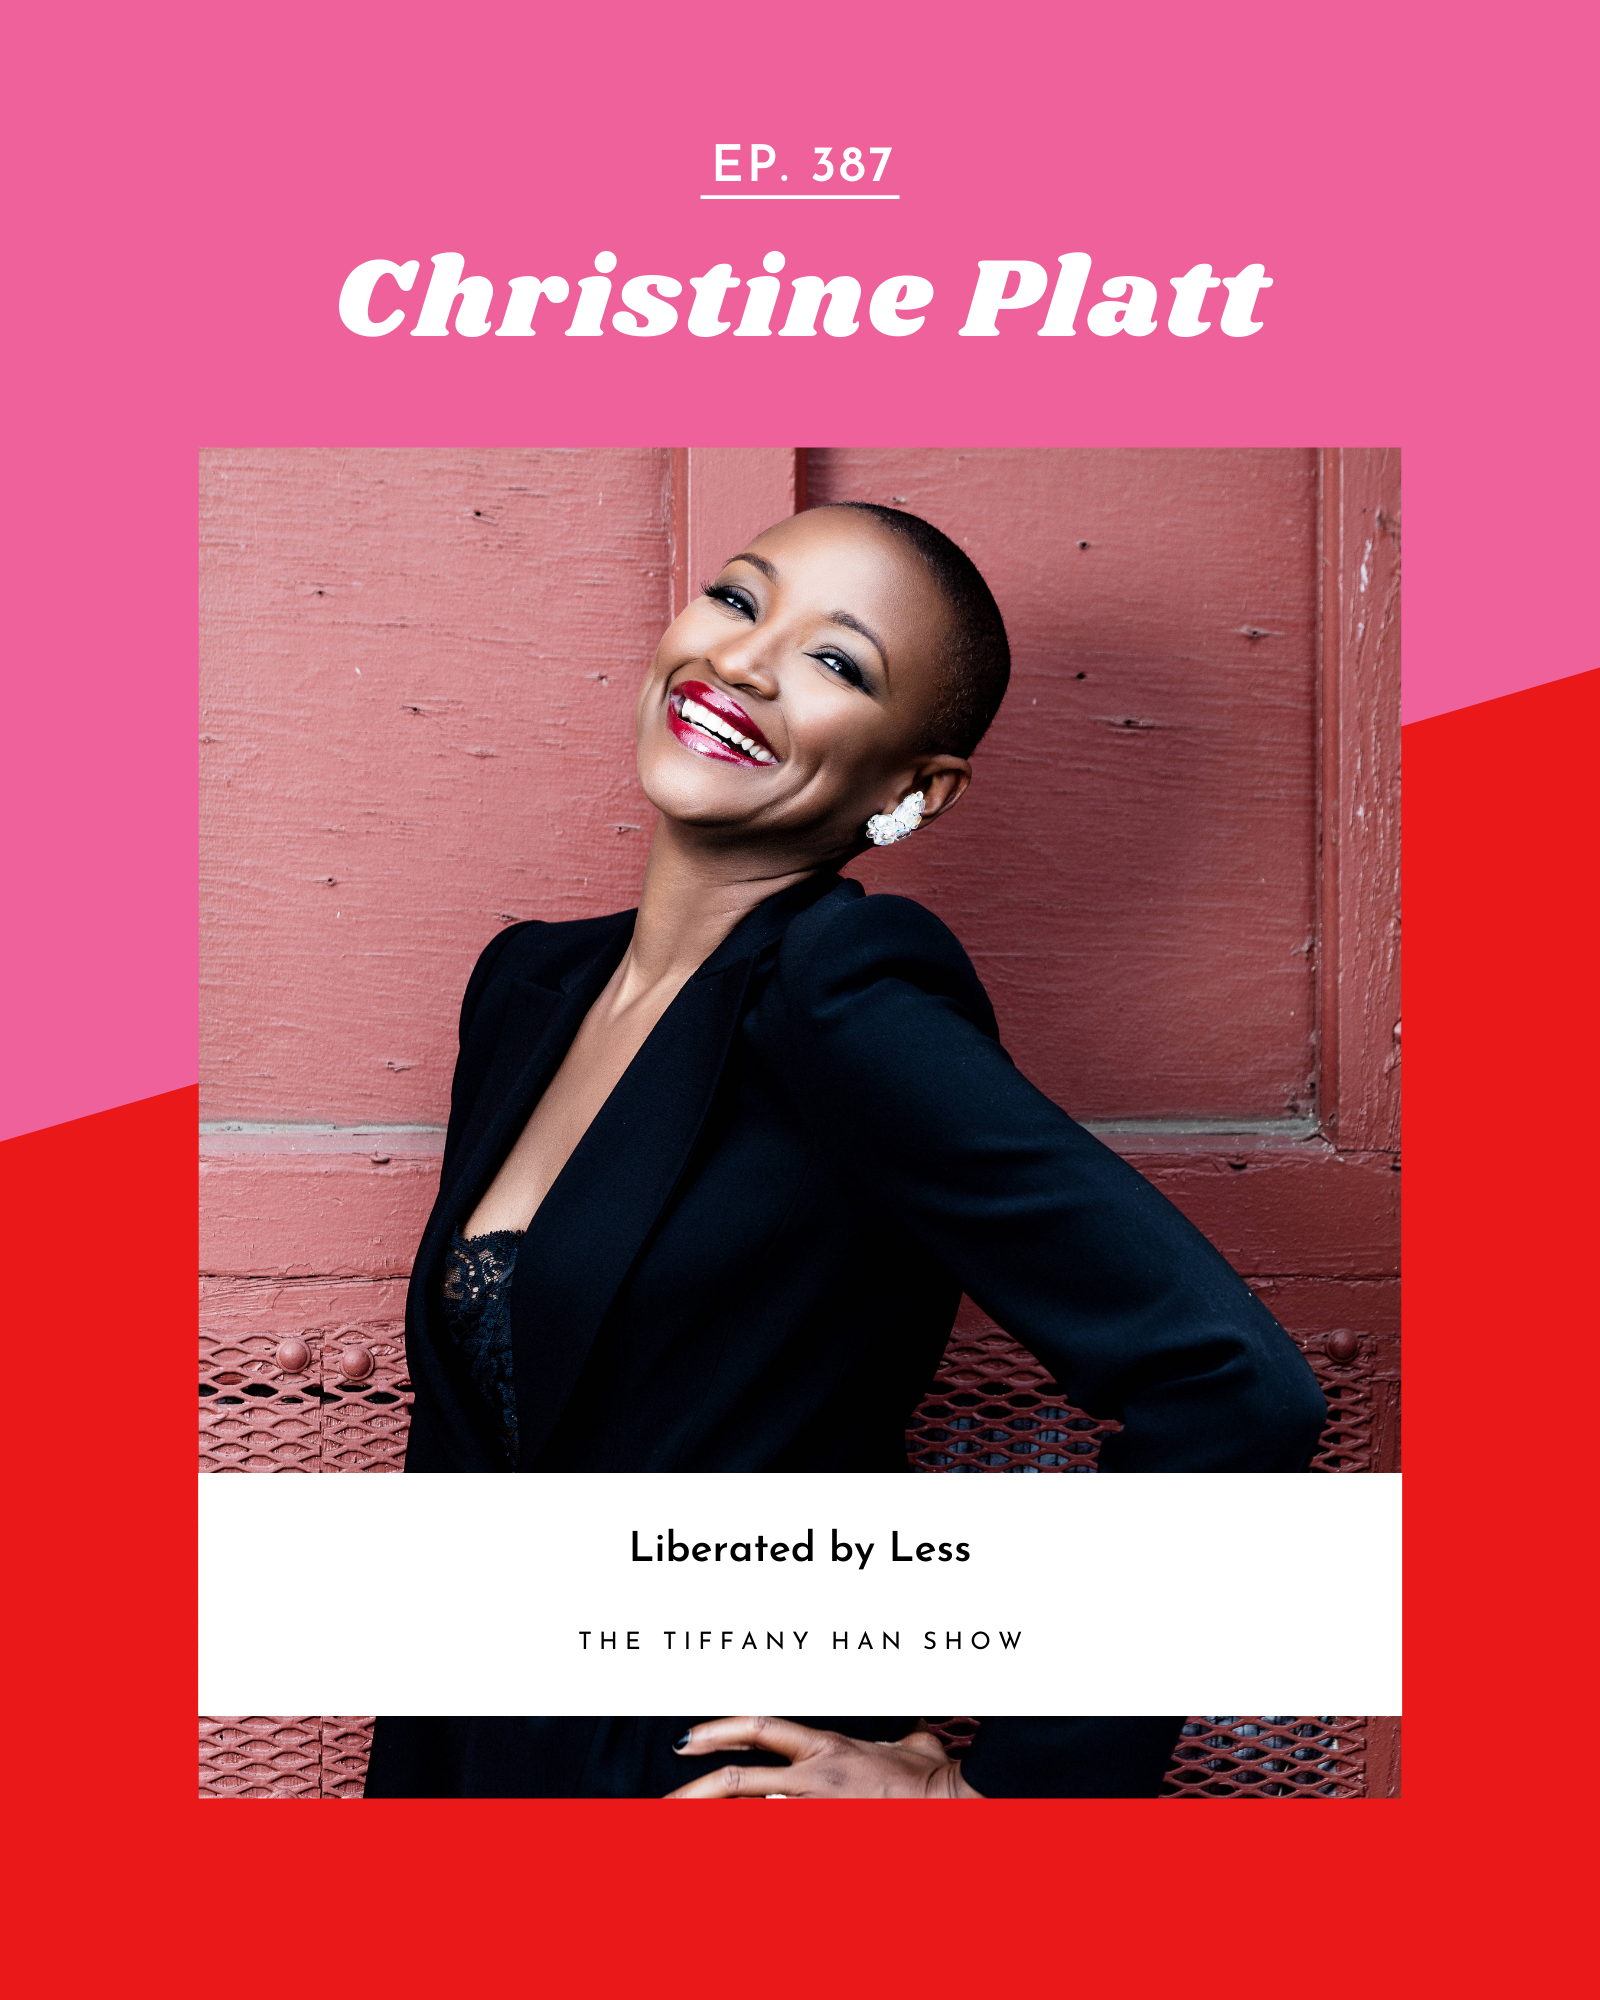 Liberated by Less with Christine Platt